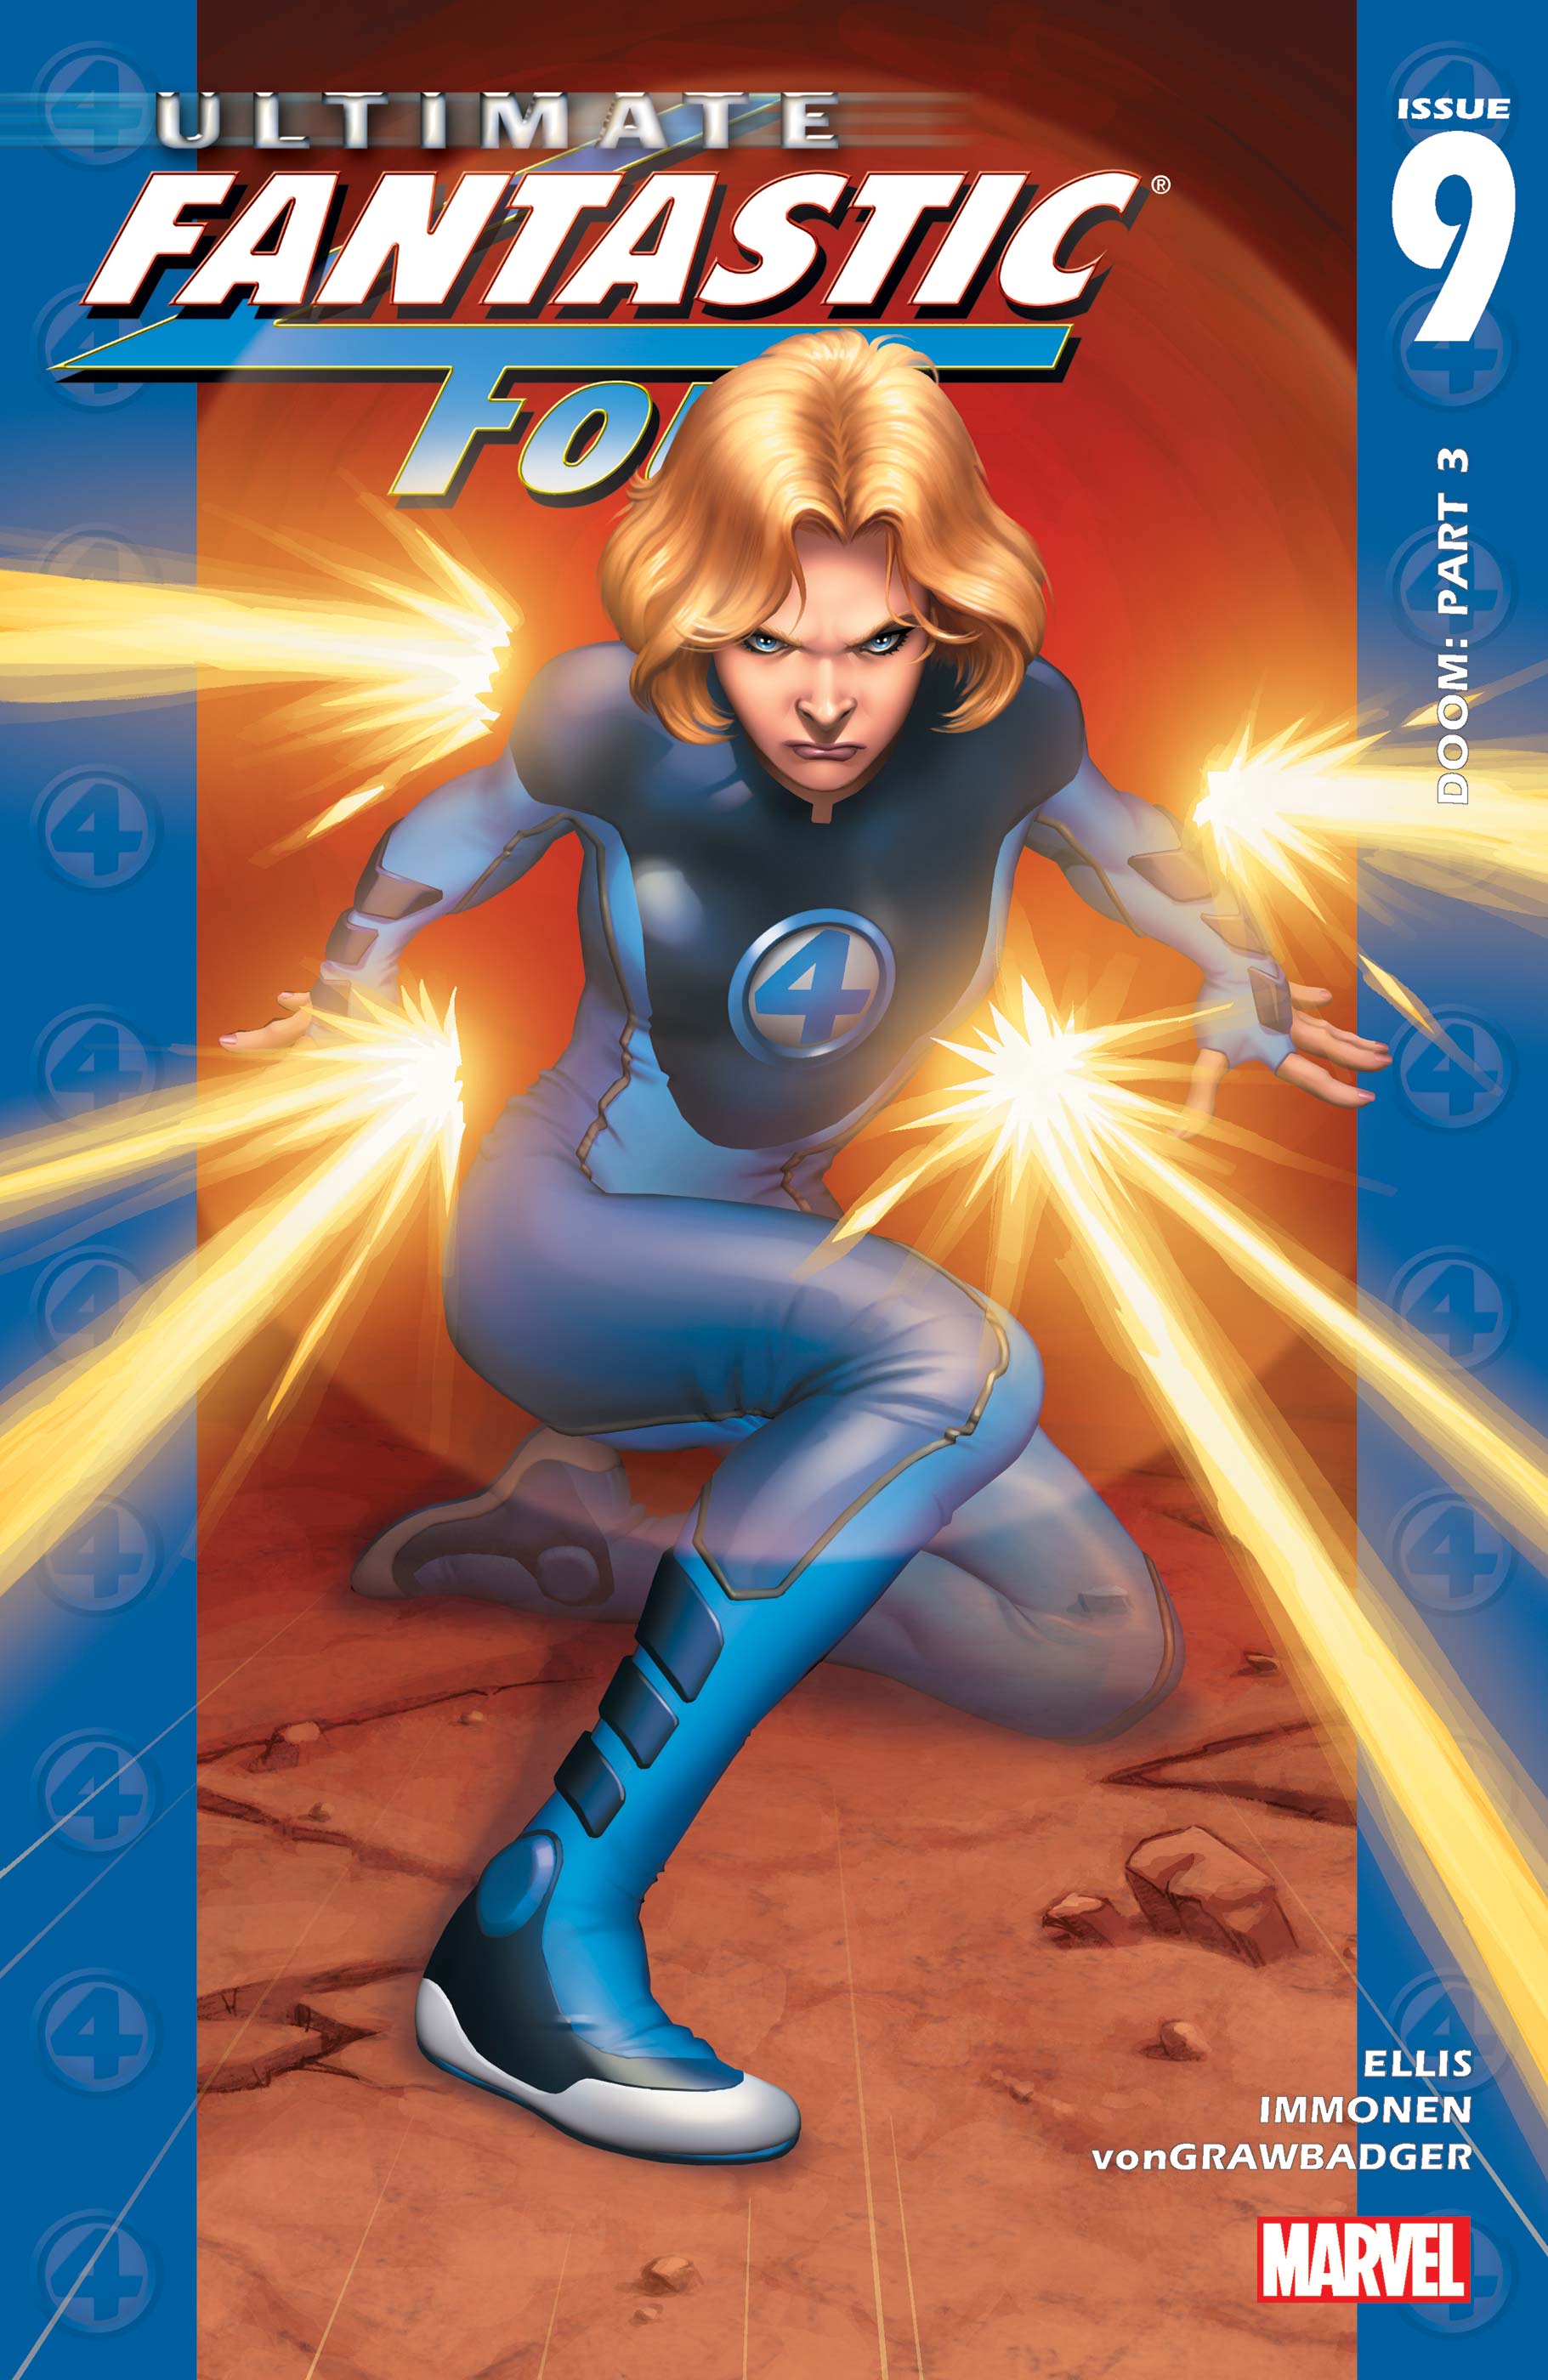 Ultimate Fantastic Four (2003) #9 | Comic Issues | Marvel